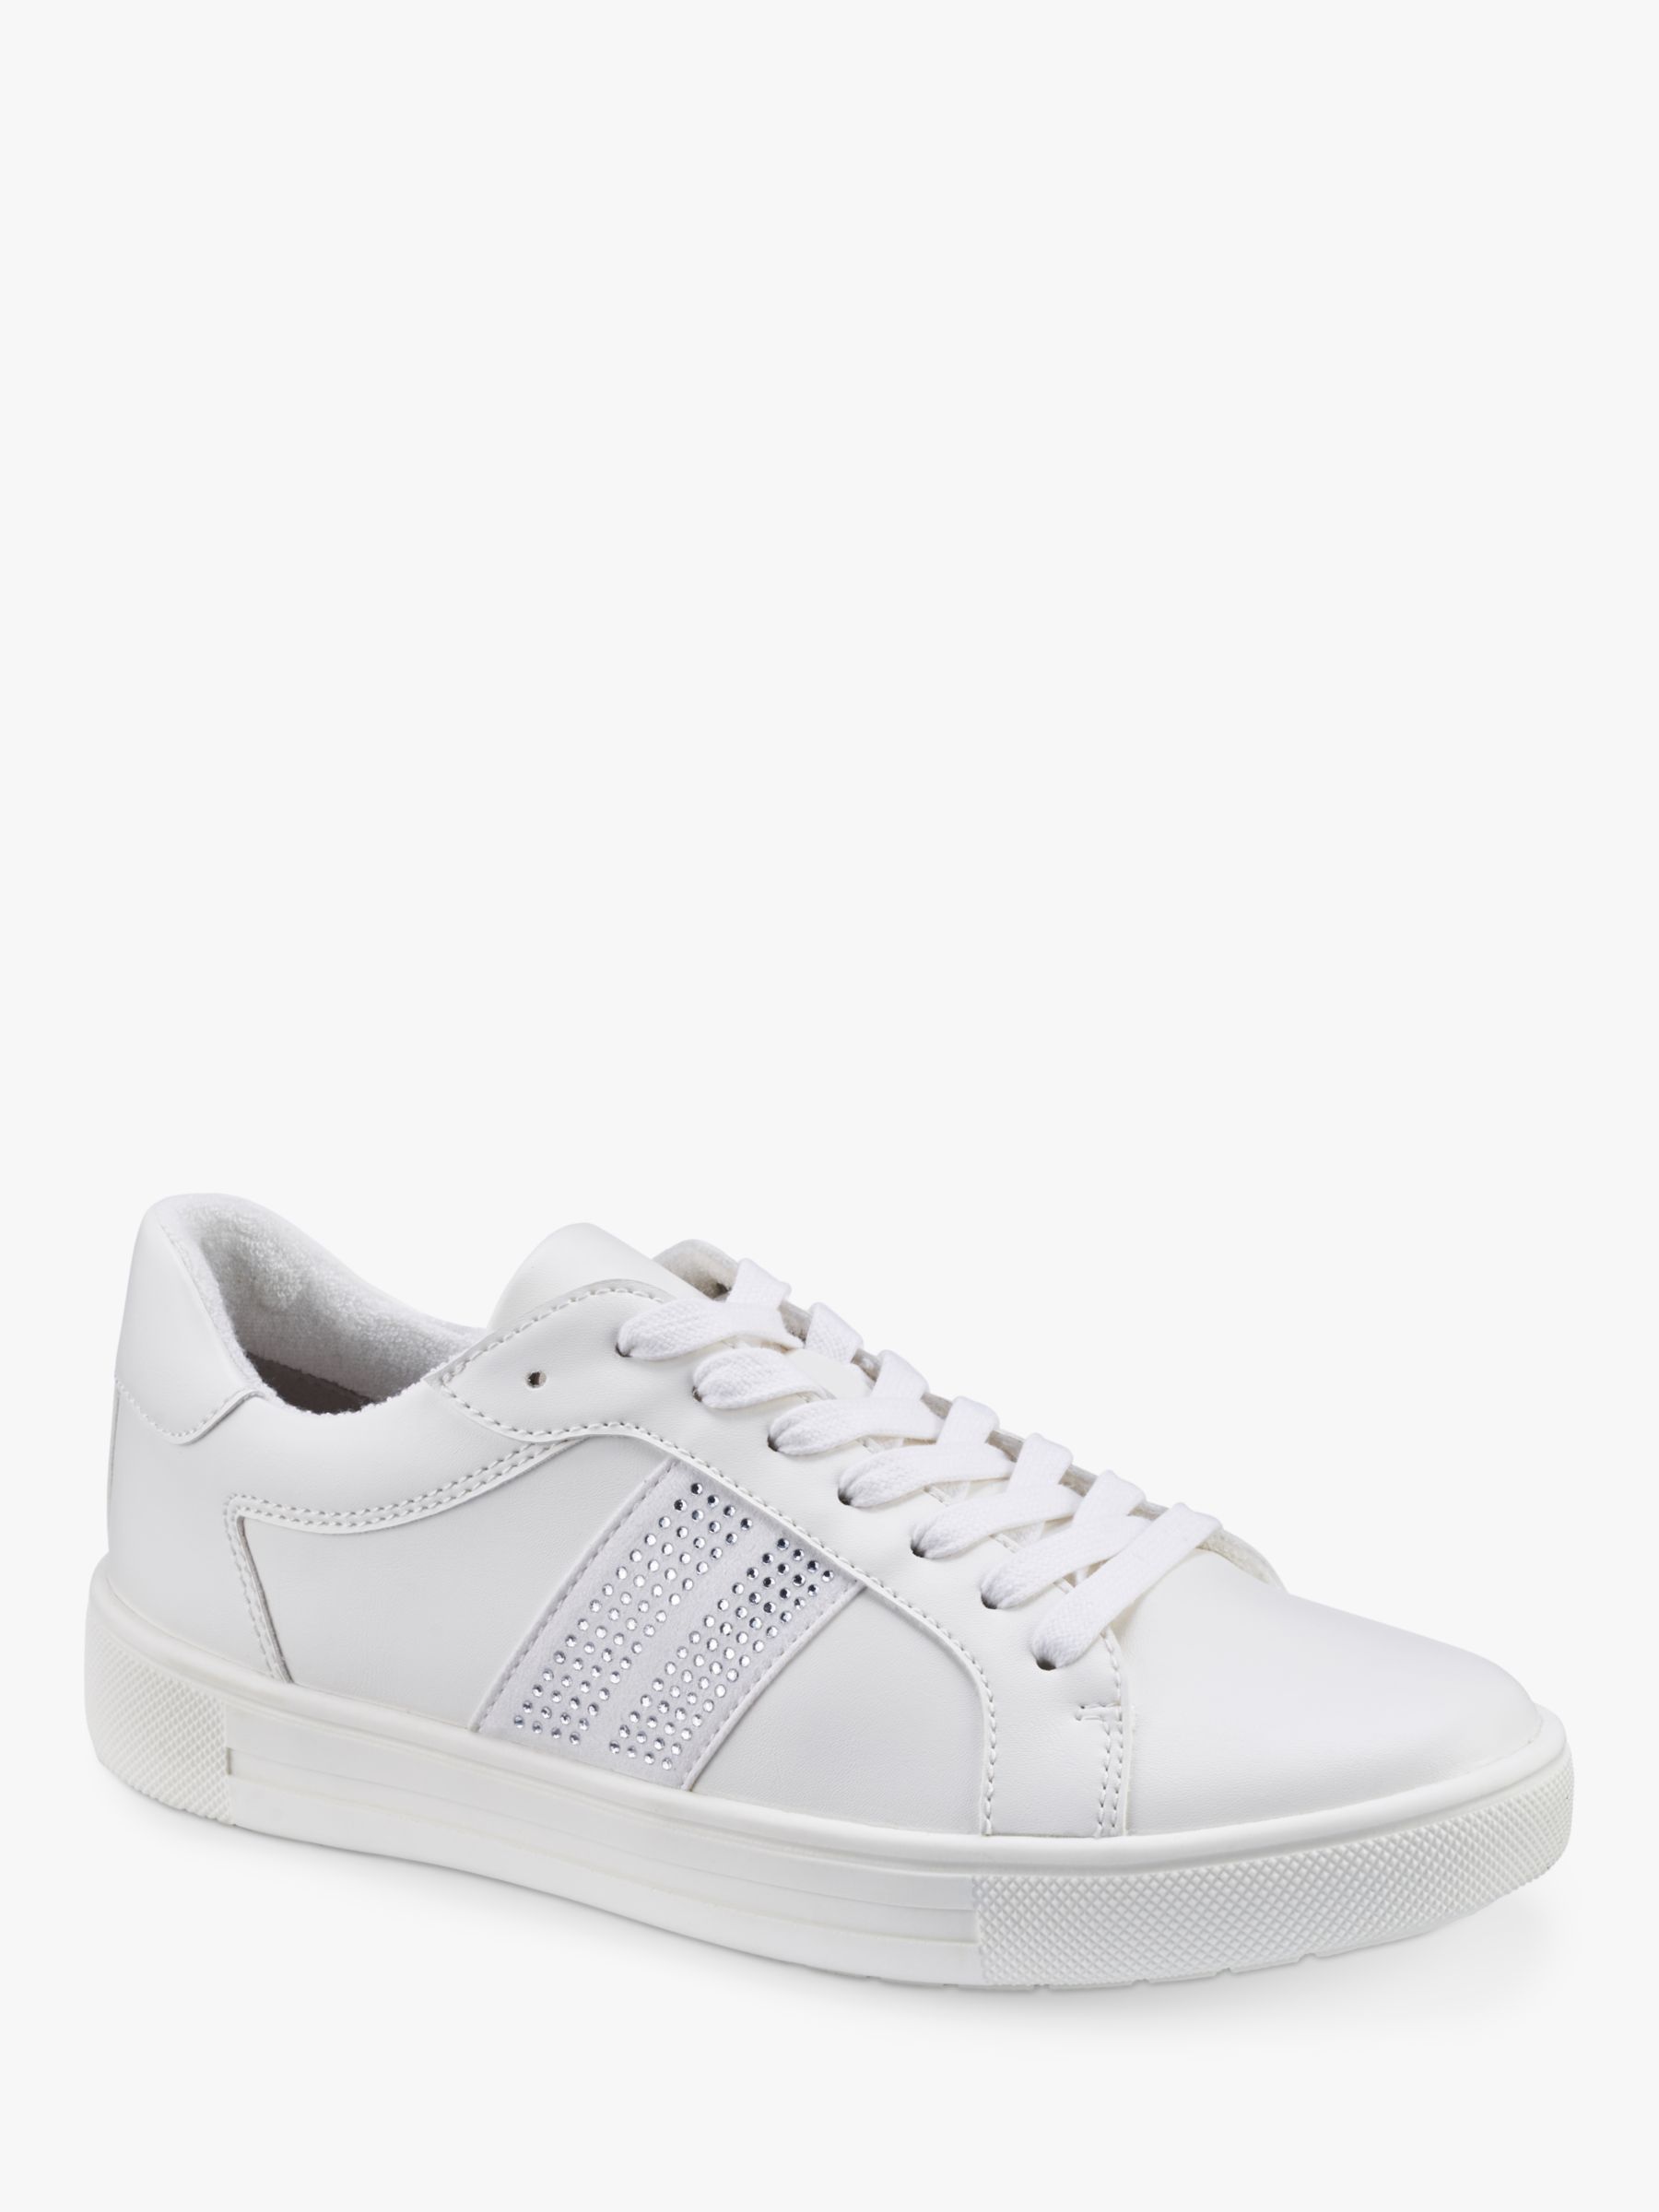 Buy Hotter Libra Sparkle Trainers Online at johnlewis.com